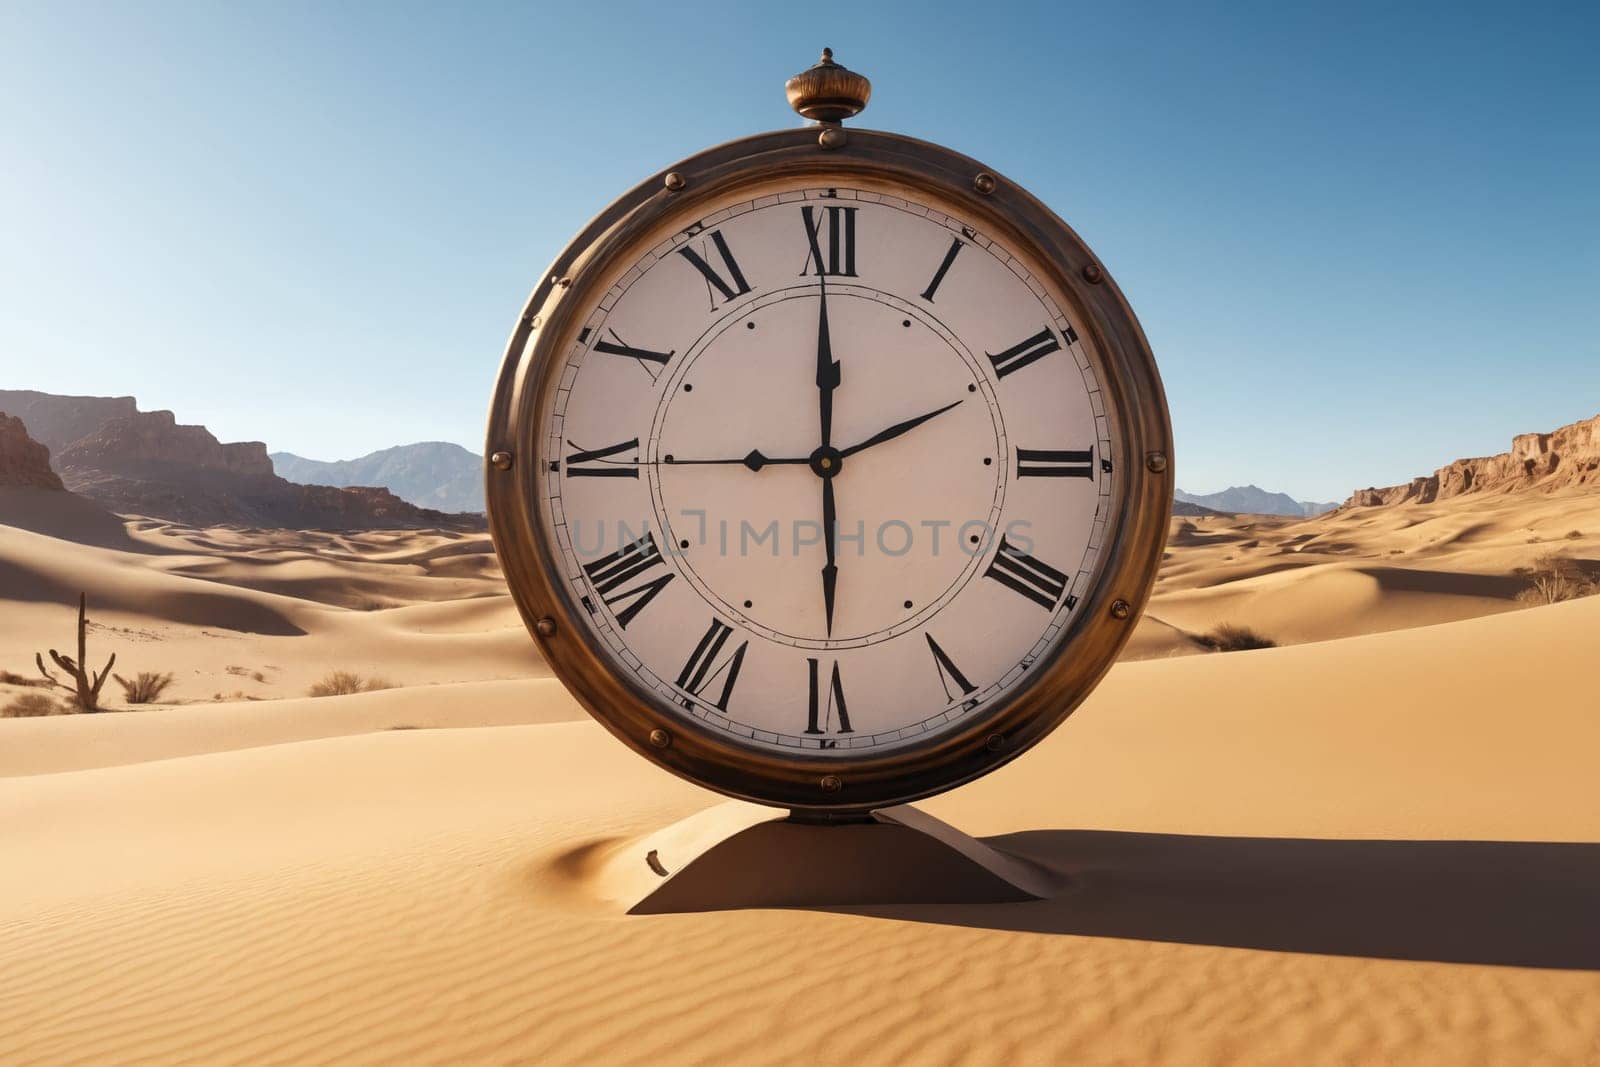 Timeless Dunes: A Surreal Merging of Clock and Desert Photo by Andre1ns